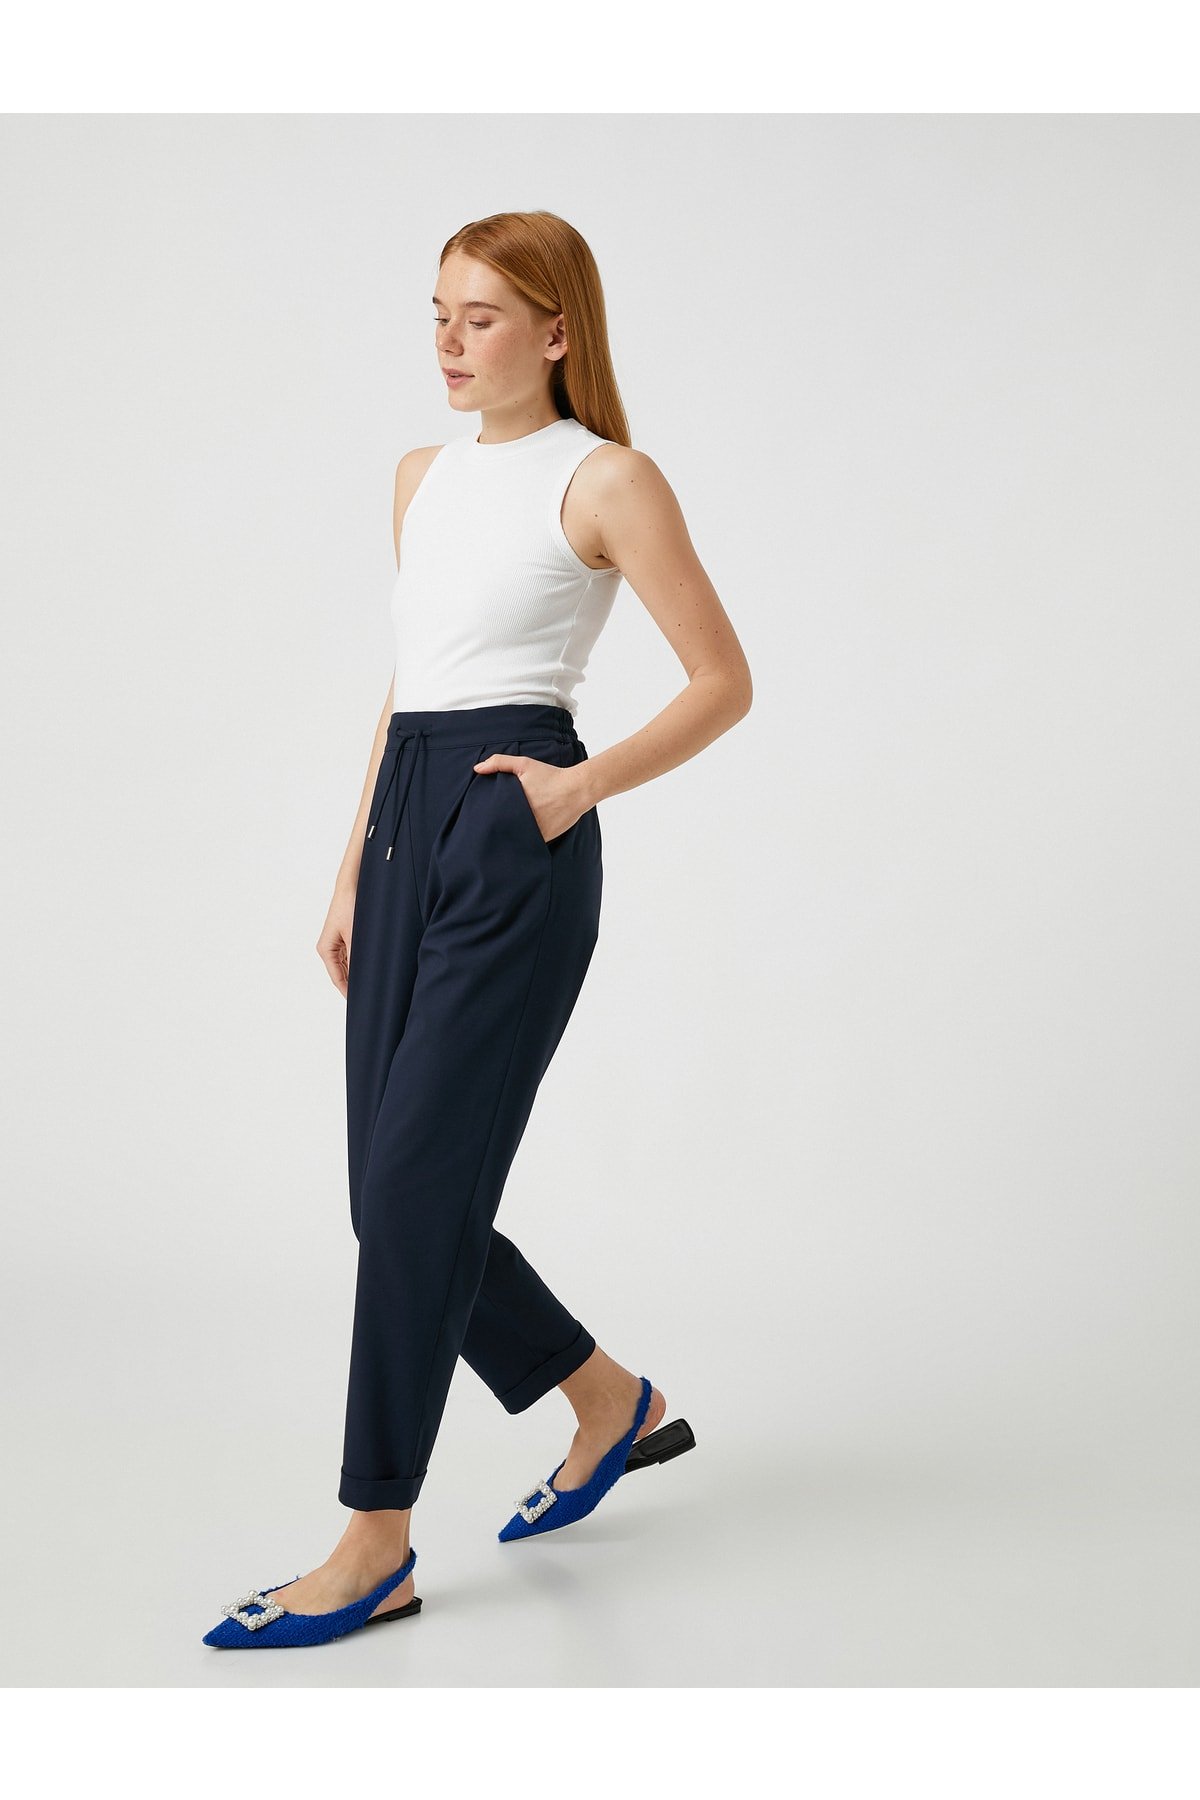 Koton Comfortable Trousers with Tie Waist, Pockets